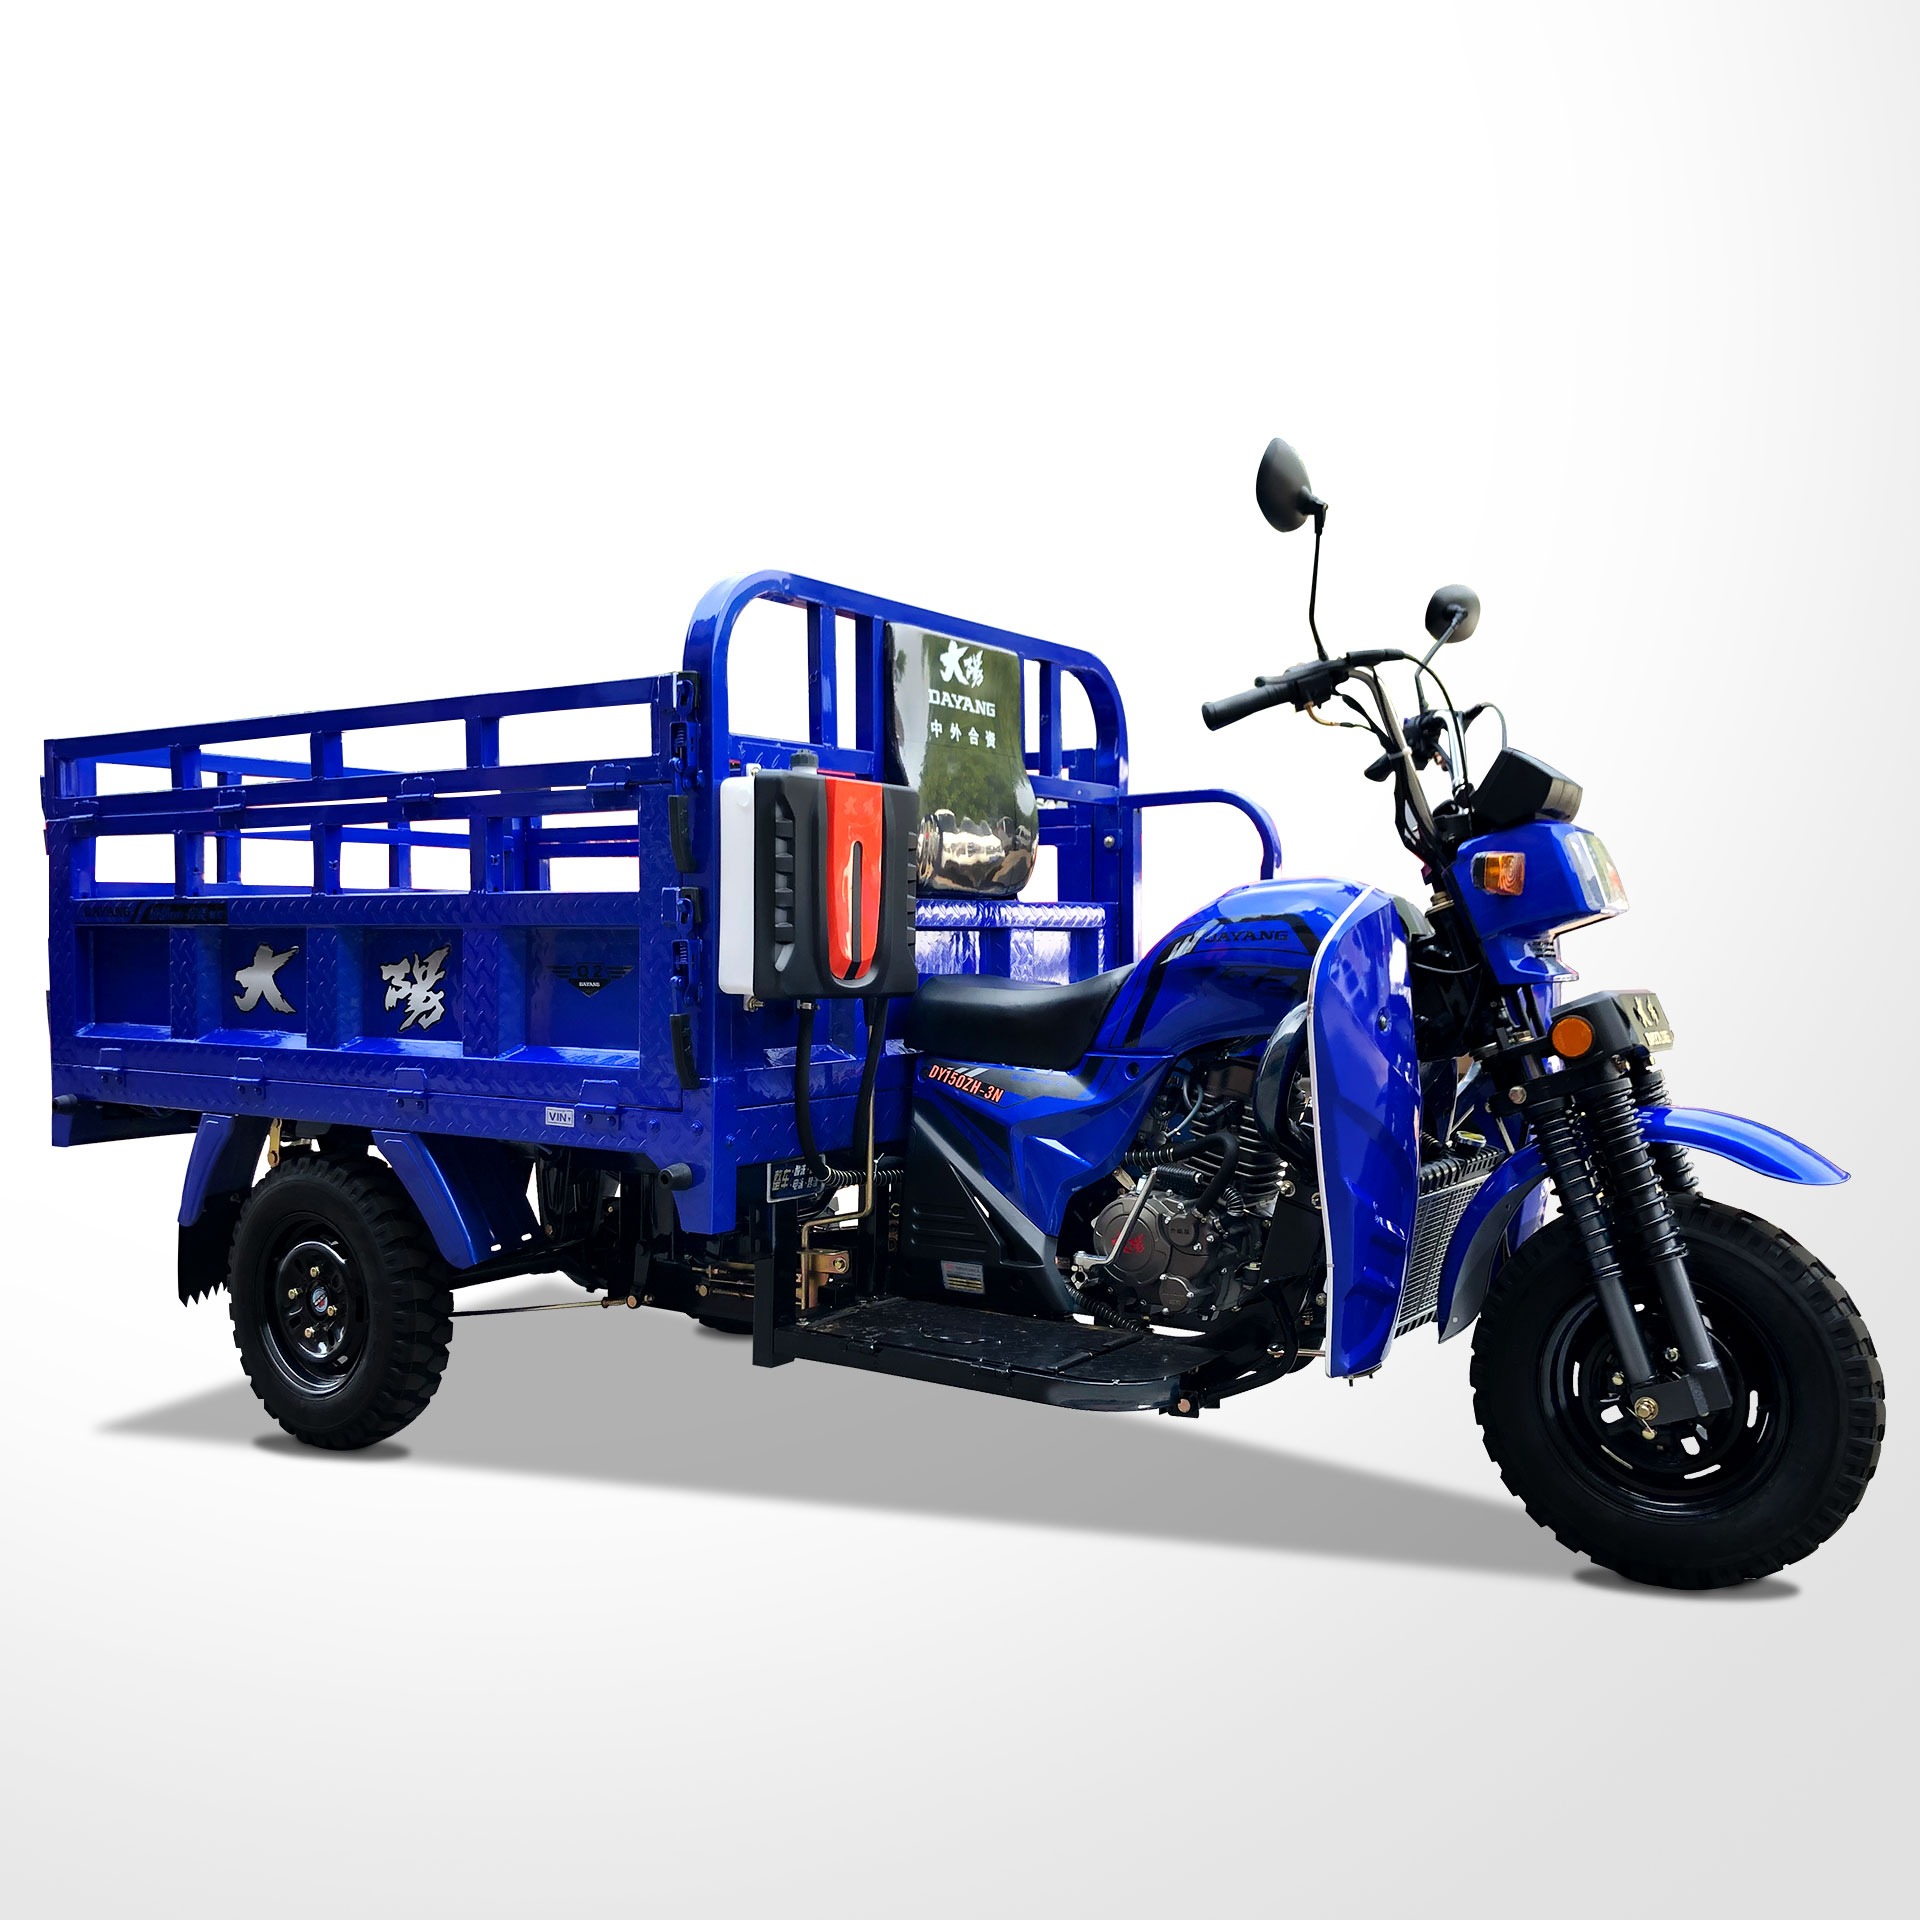 DAYANG 2021 new design Factory Direct motorized Cargo Bike Cargo Bike Tricycle 3 Wheel gasoline fuel oil For Kids